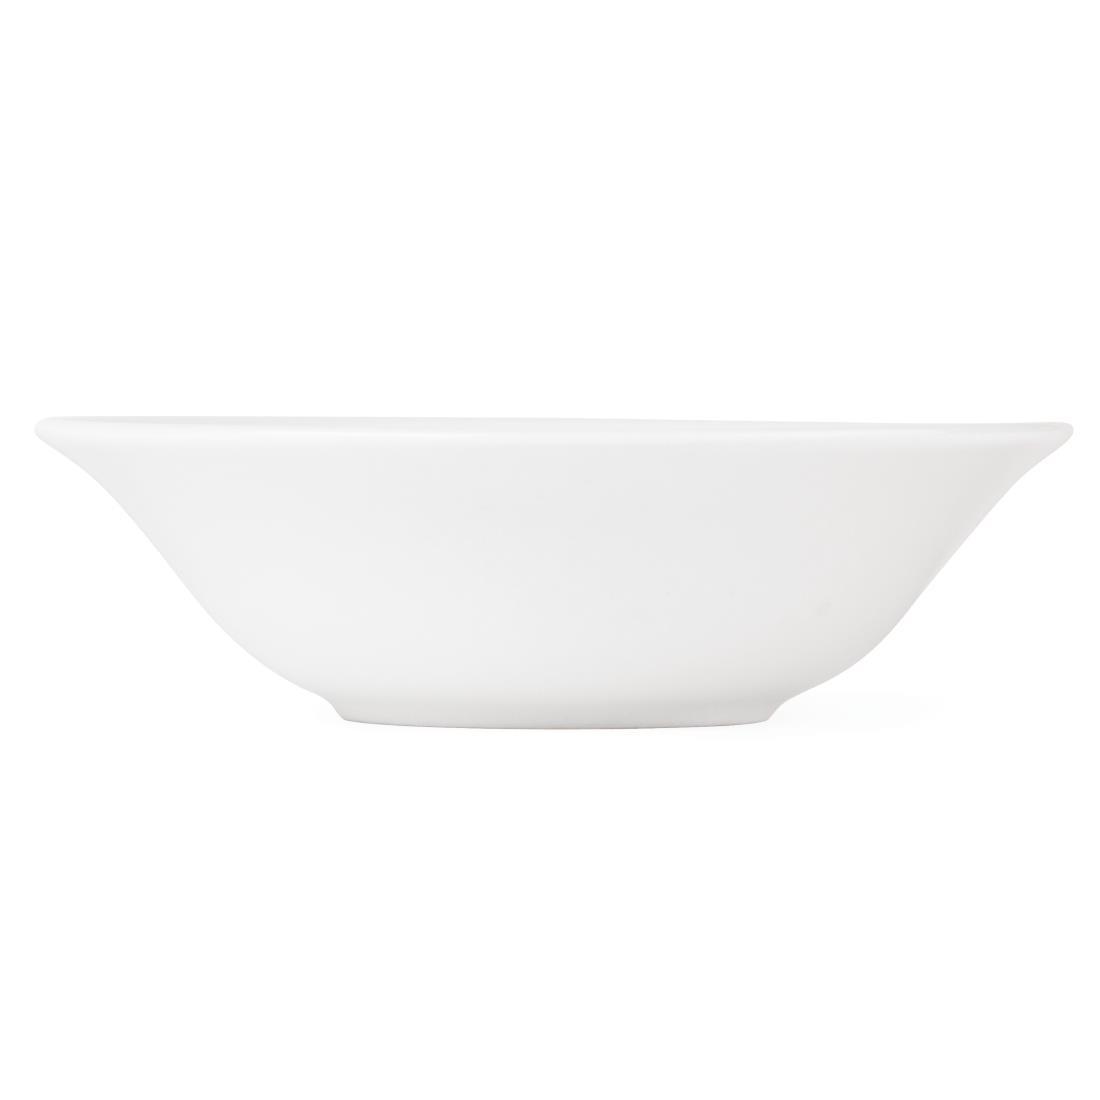 Olympia Athena Oatmeal Bowls 153mm (Pack of 12) - CC213  - 4